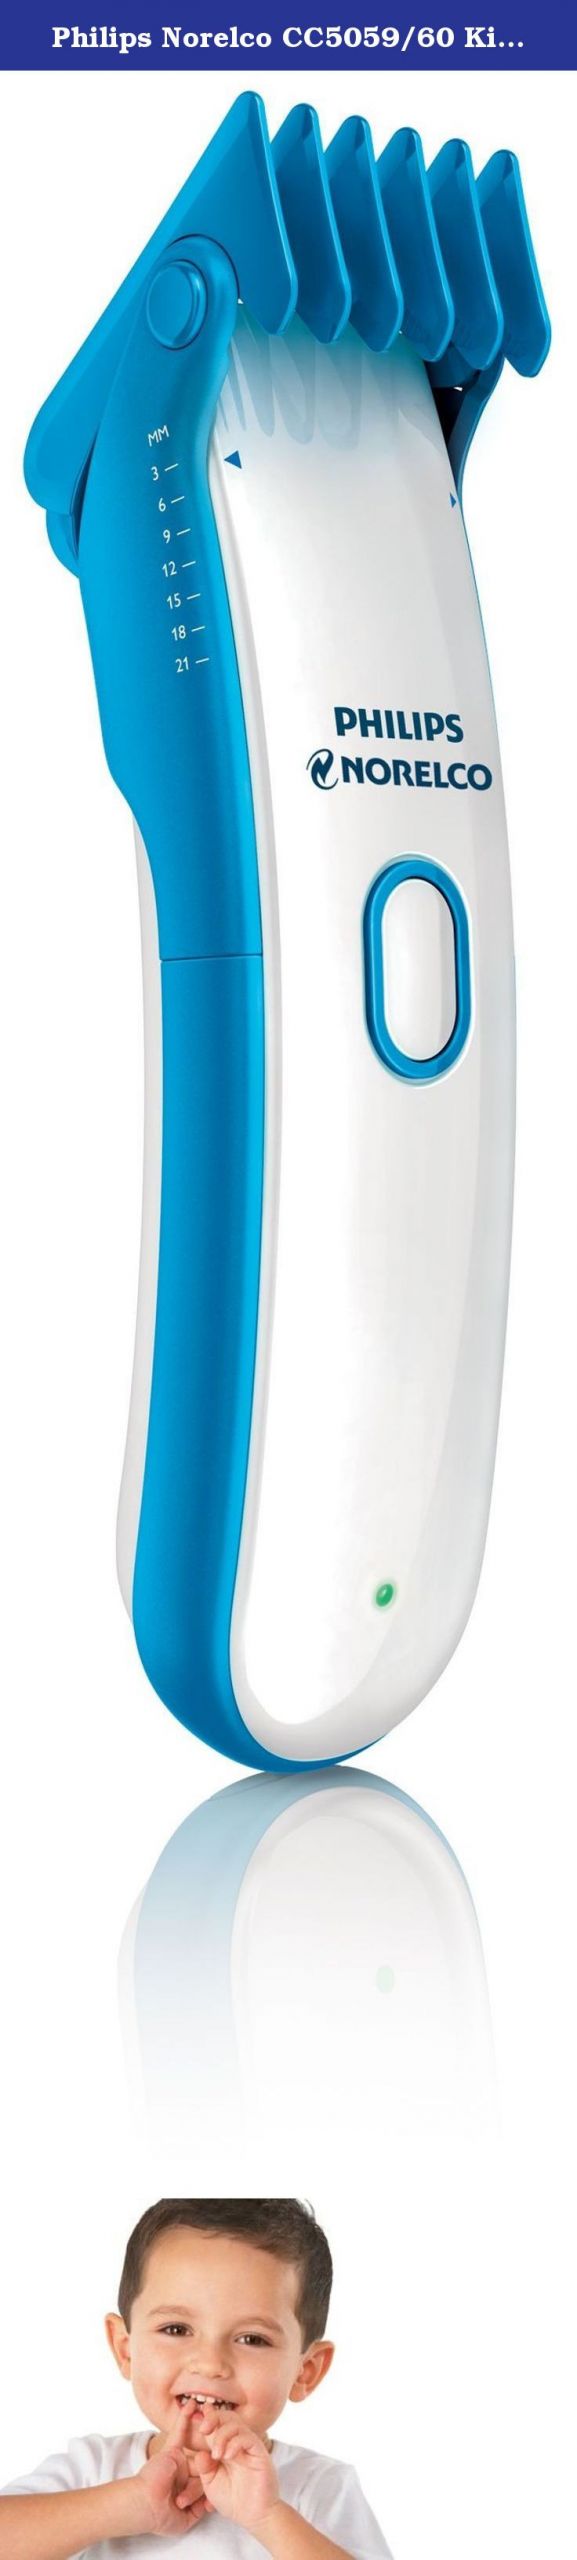 Philips Norelco Cc5059 60 Kids Hair Clipper
 Pin on Hair Cutting Tools Hair Care Beauty & Personal Care